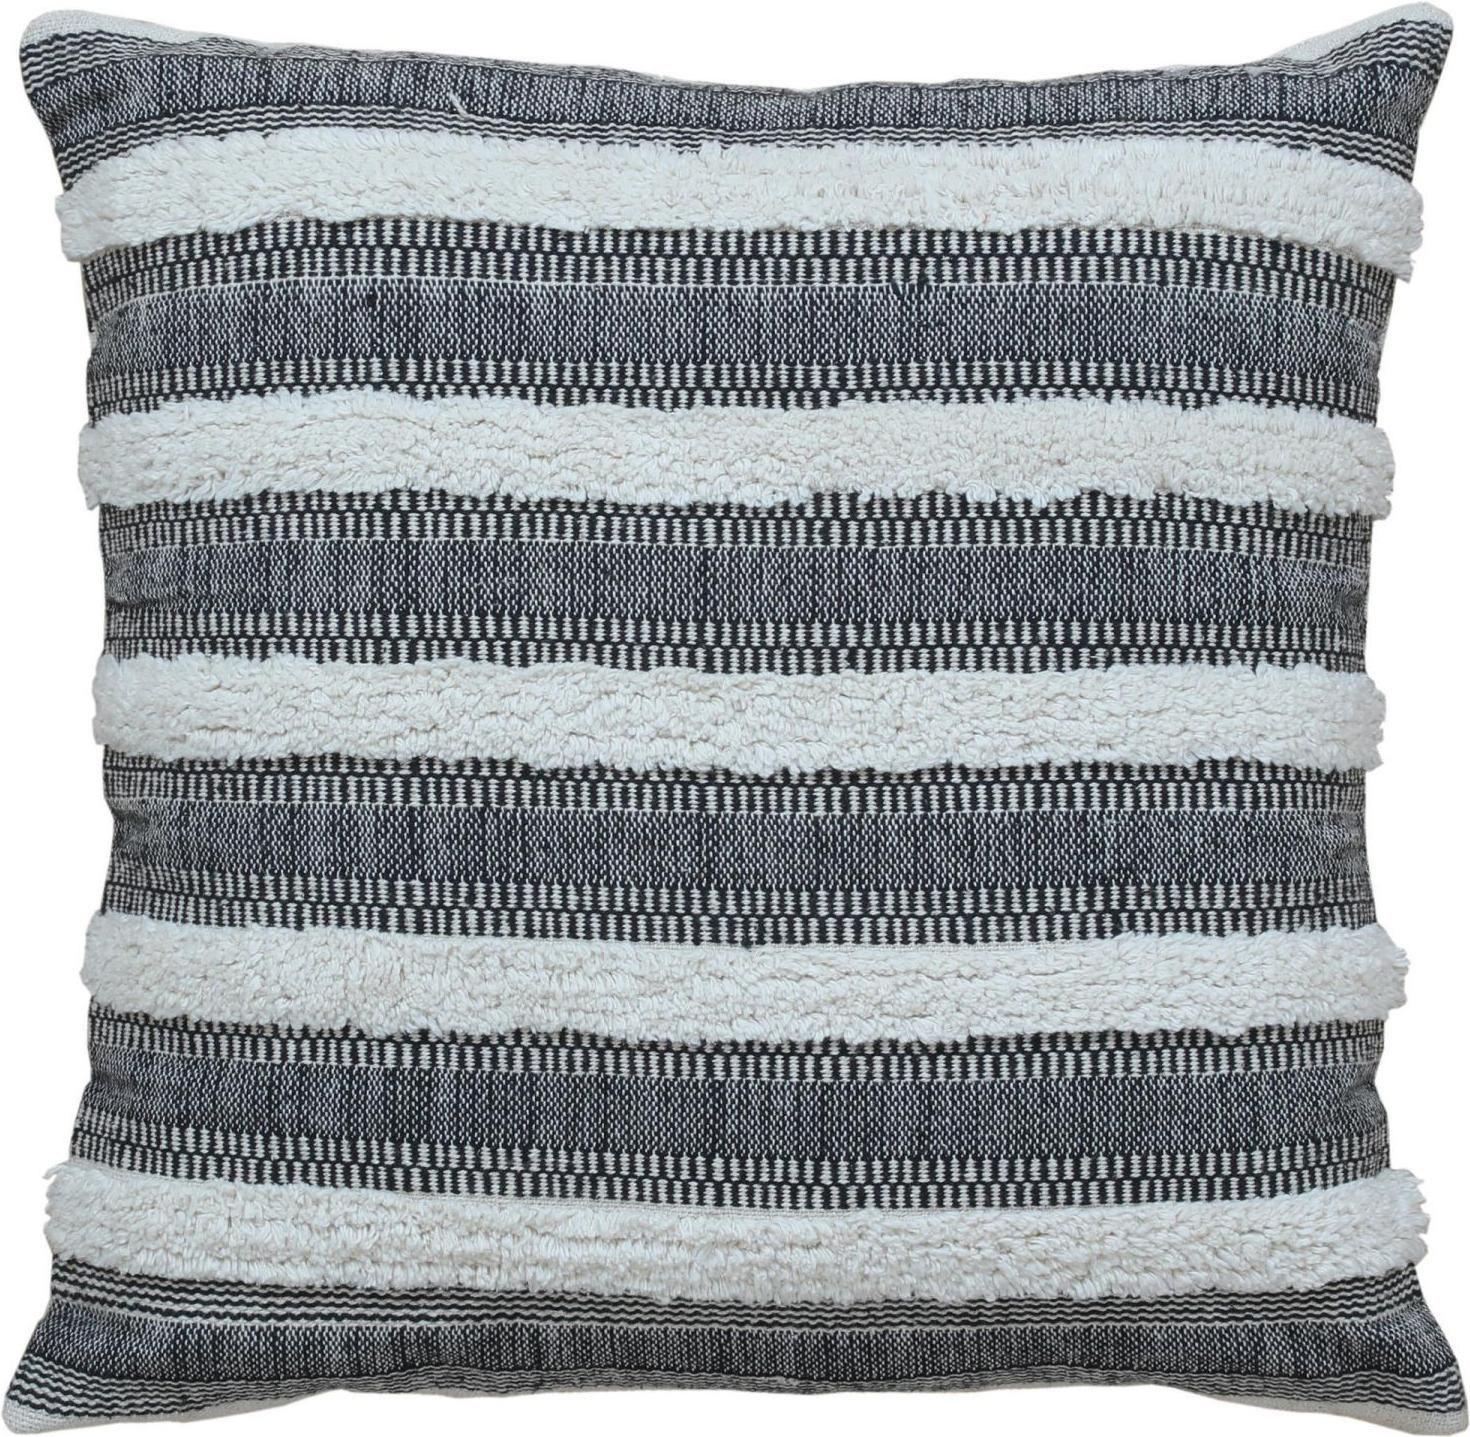 Indian Gray Boho Chic Wool and Cotton Pillow With Geometric Design For Sale